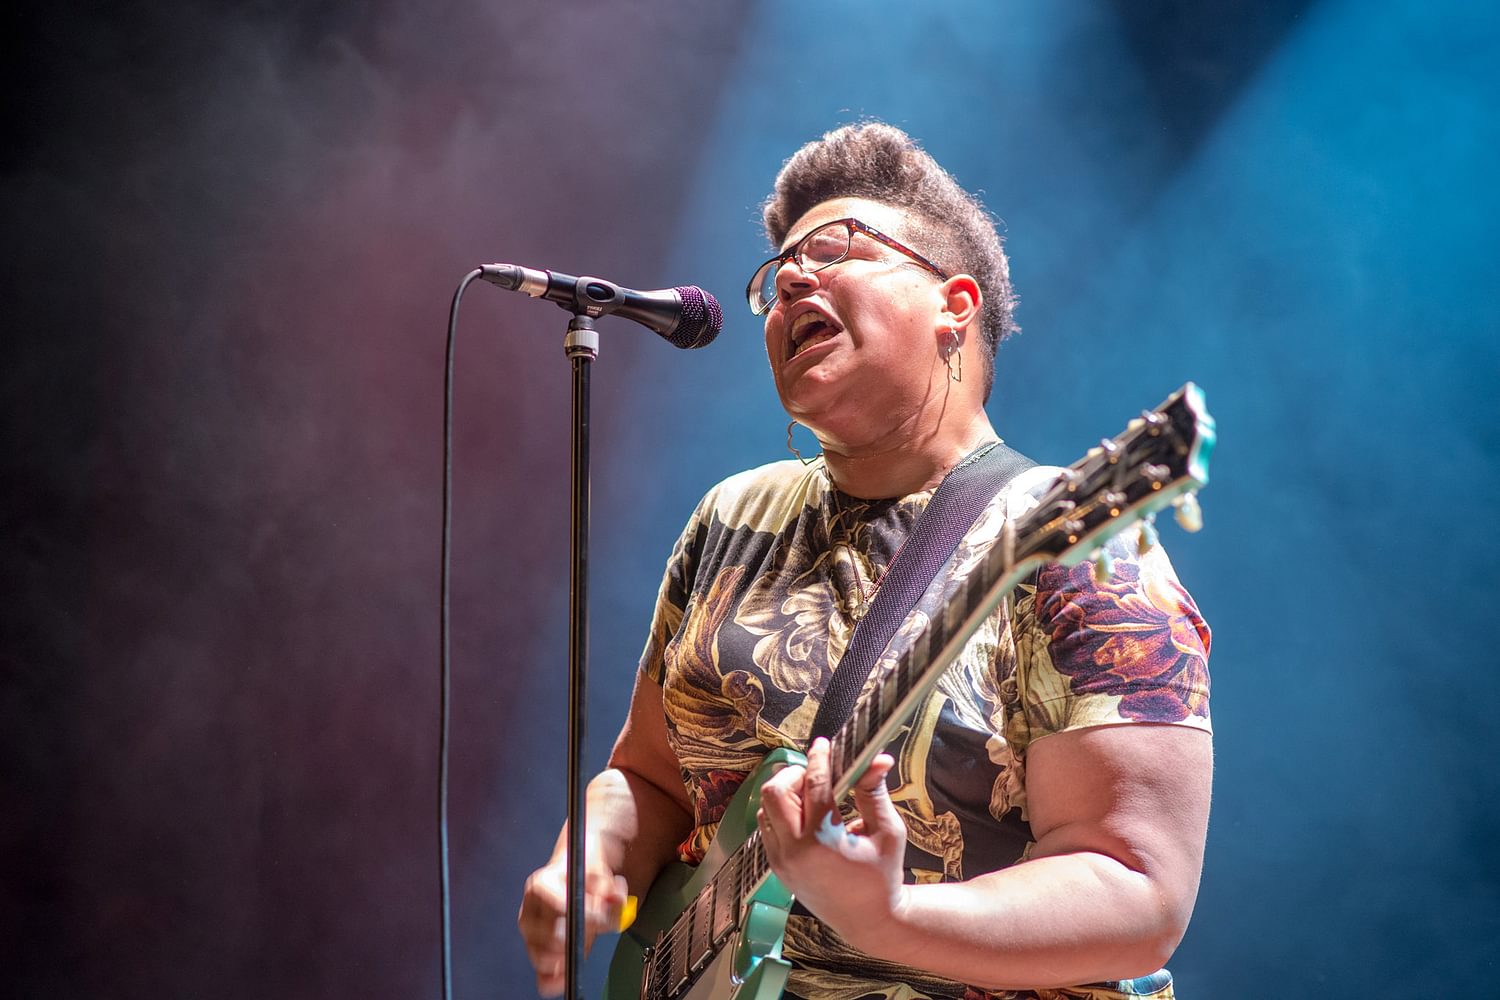 Watch Alabama Shakes play ‘Gimme All Your Love’ and ‘Future People’ on Conan